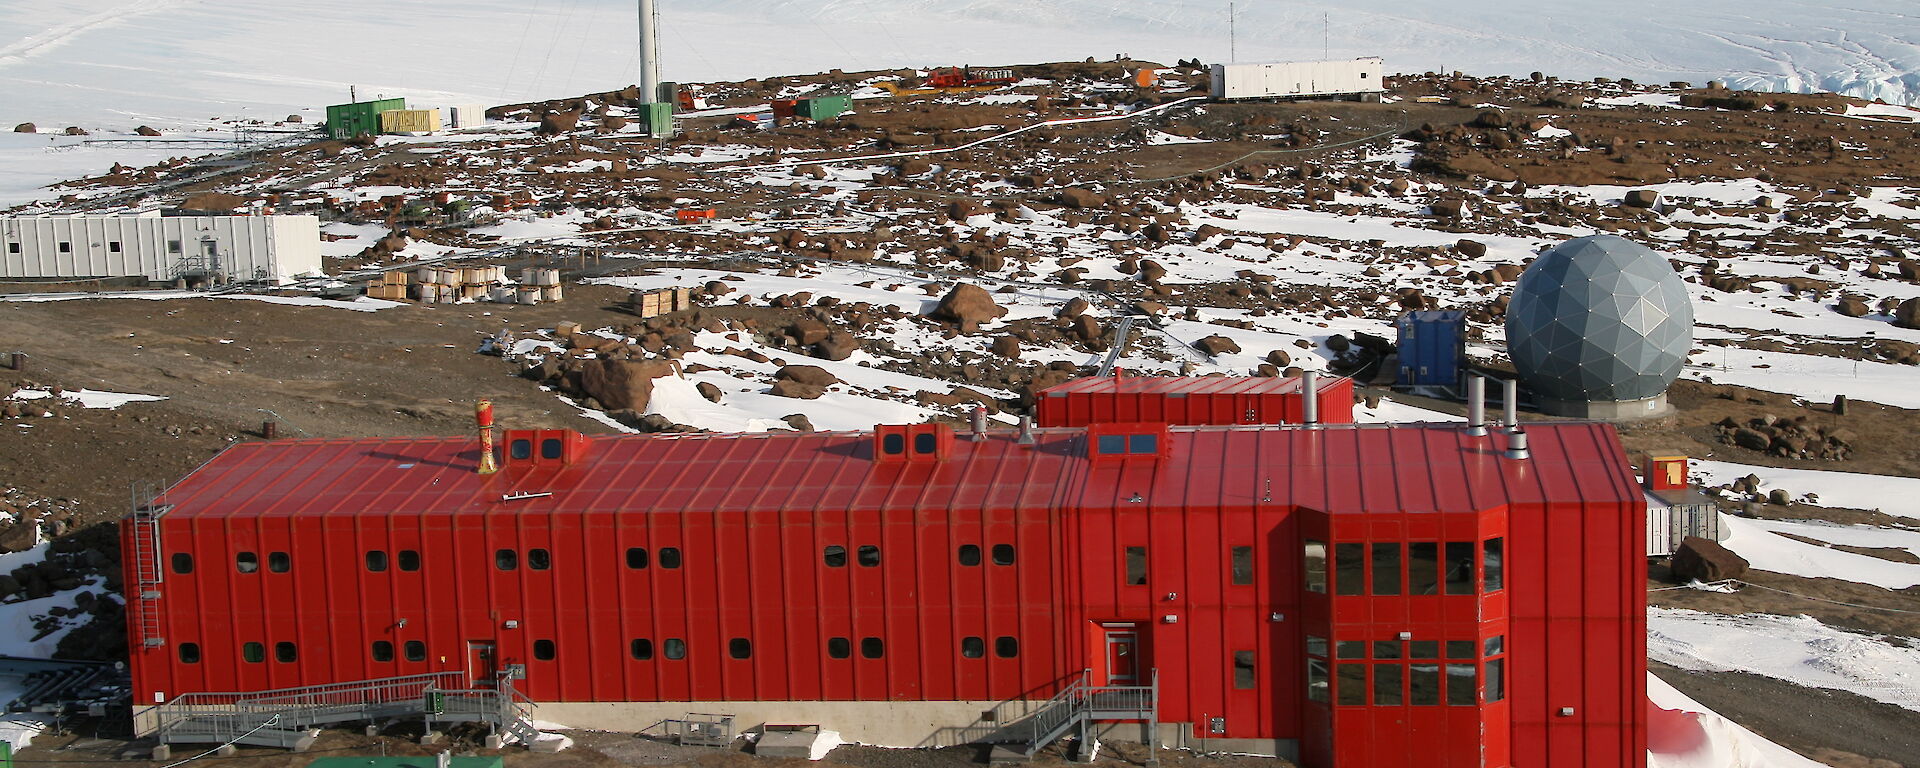 Mawson station’s Red Shed as seen from the top of the wind turbine